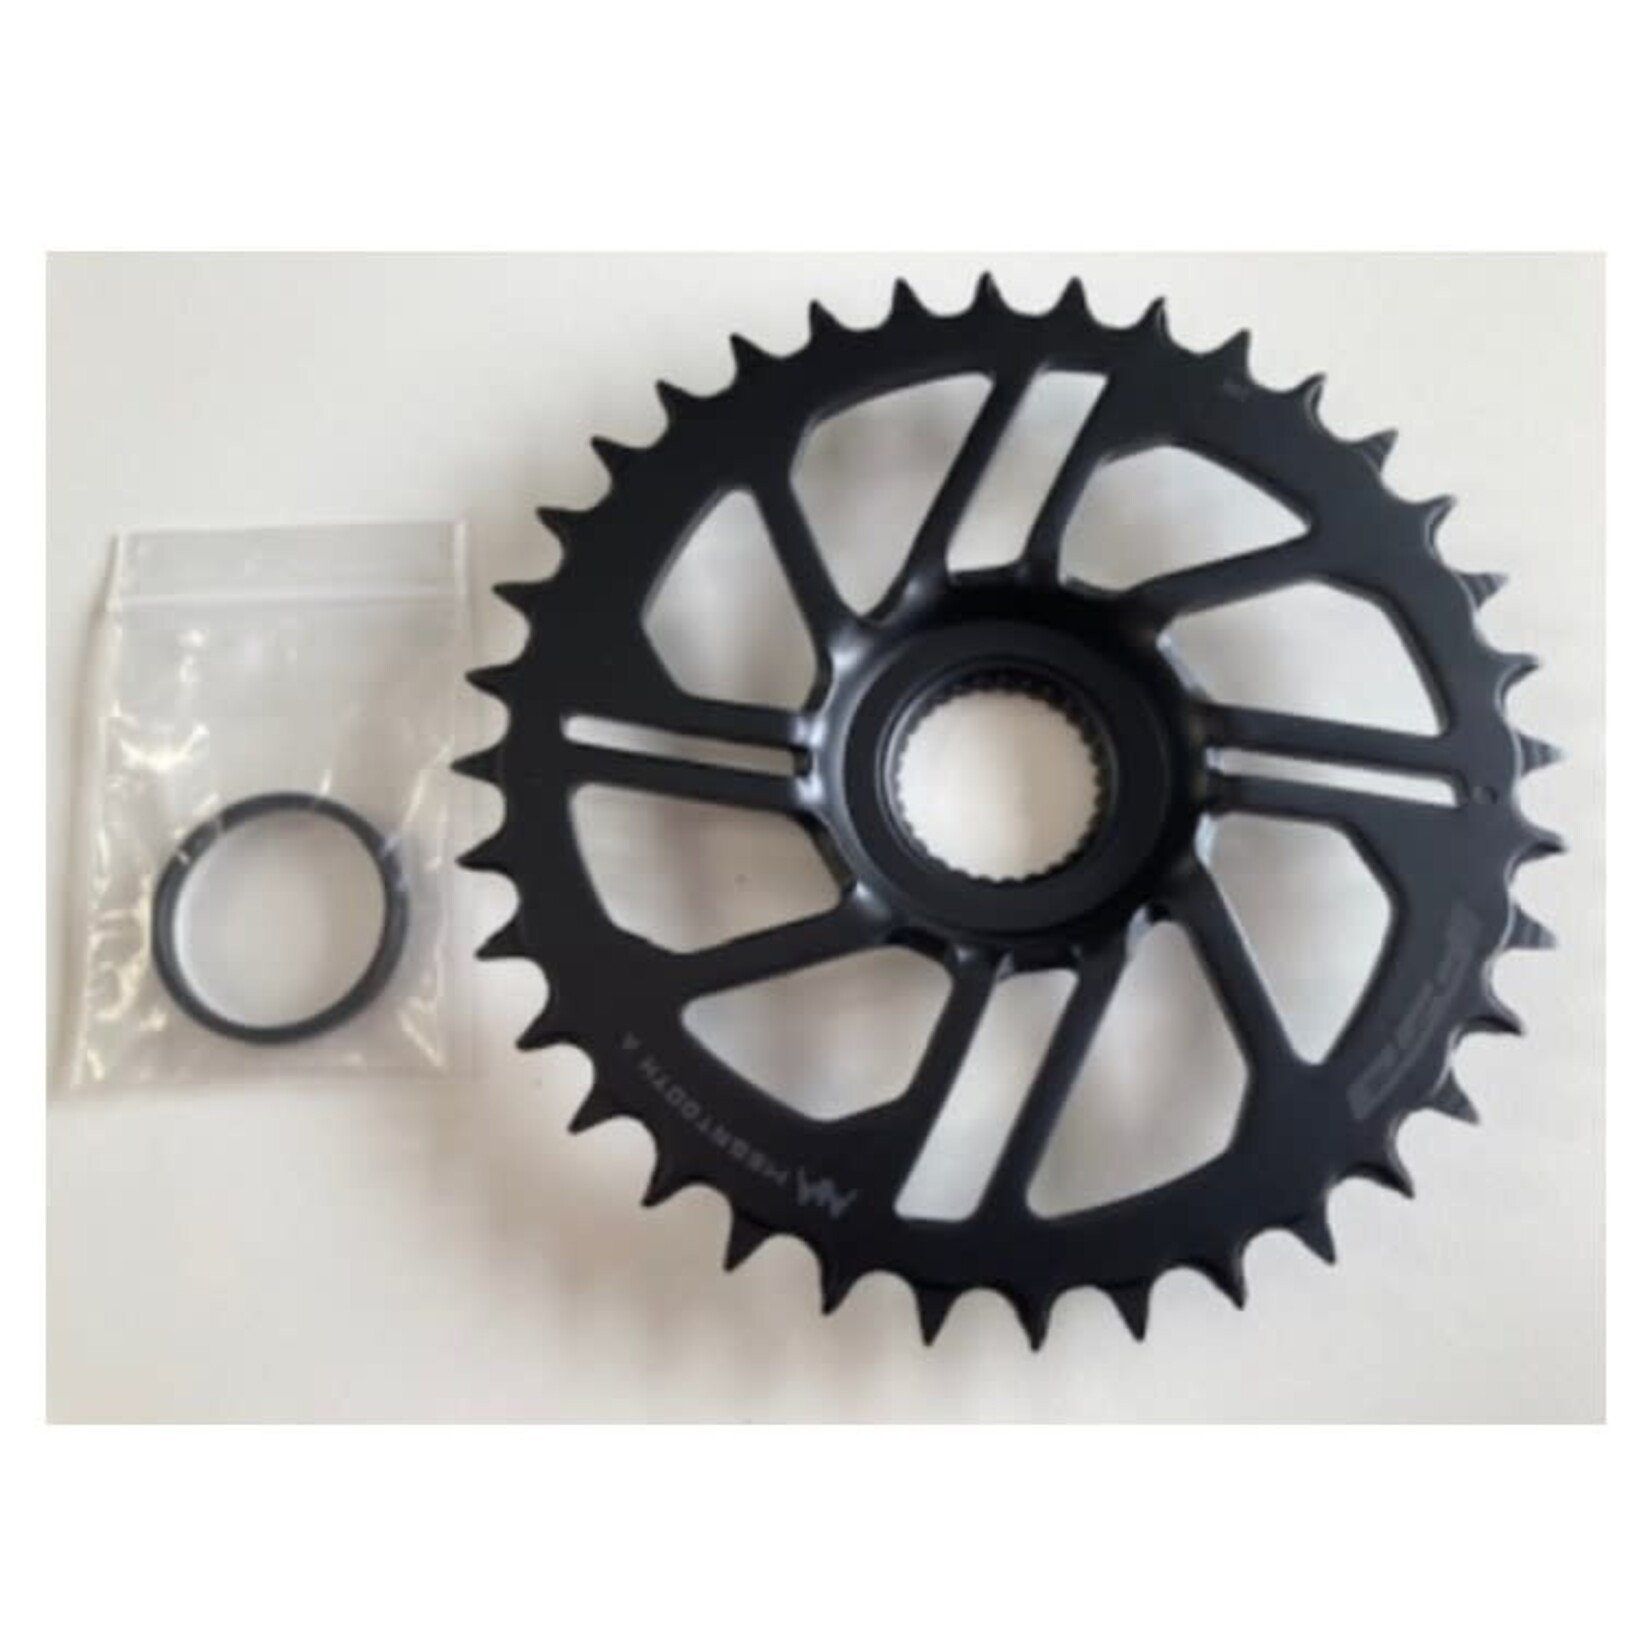 Giant Giant Talon/Tempt E-Bike MY21/22/23 Chainring CW/36 with Spacer